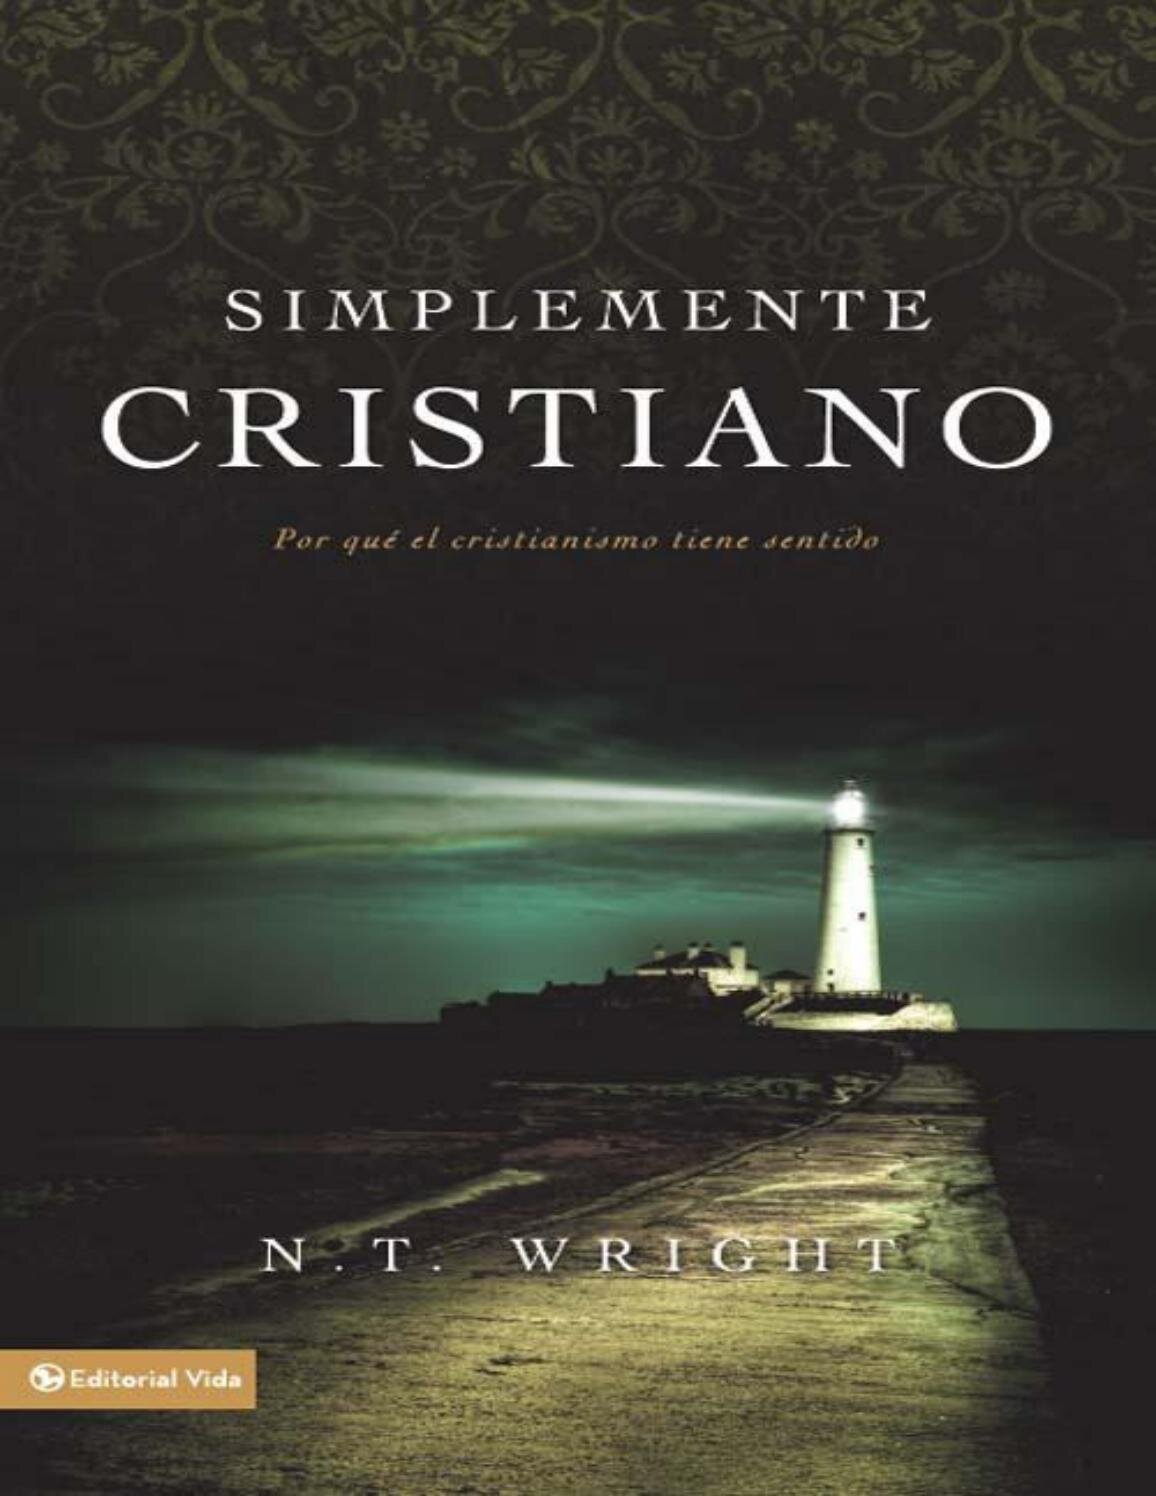 Simplemente cristiano - NT Wright.jpg